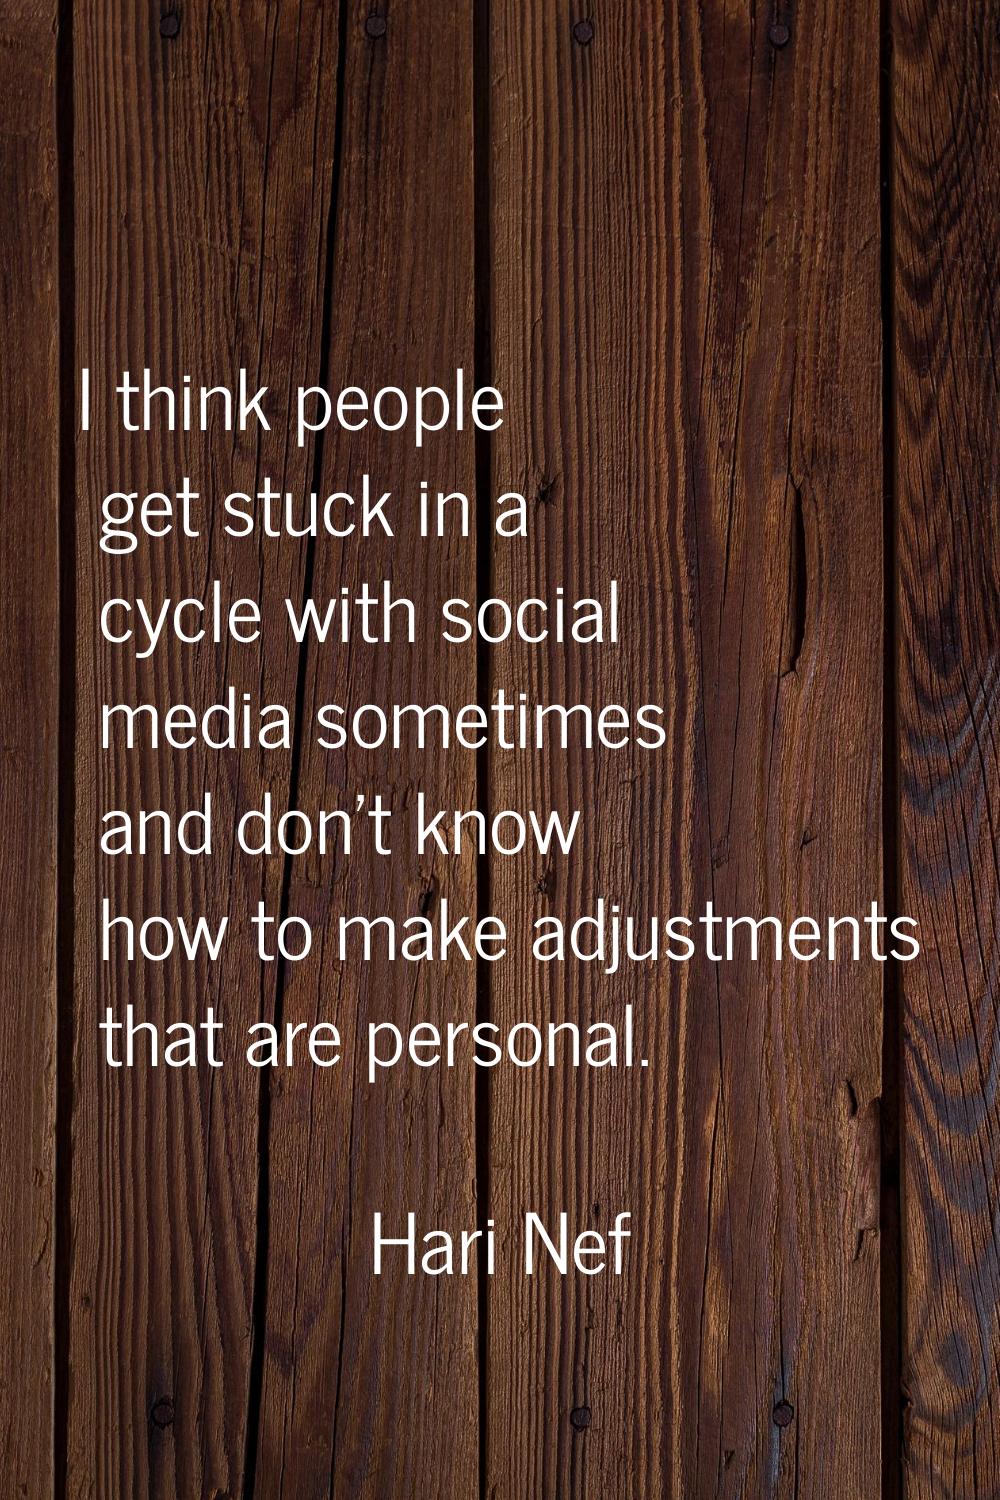 I think people get stuck in a cycle with social media sometimes and don't know how to make adjustme